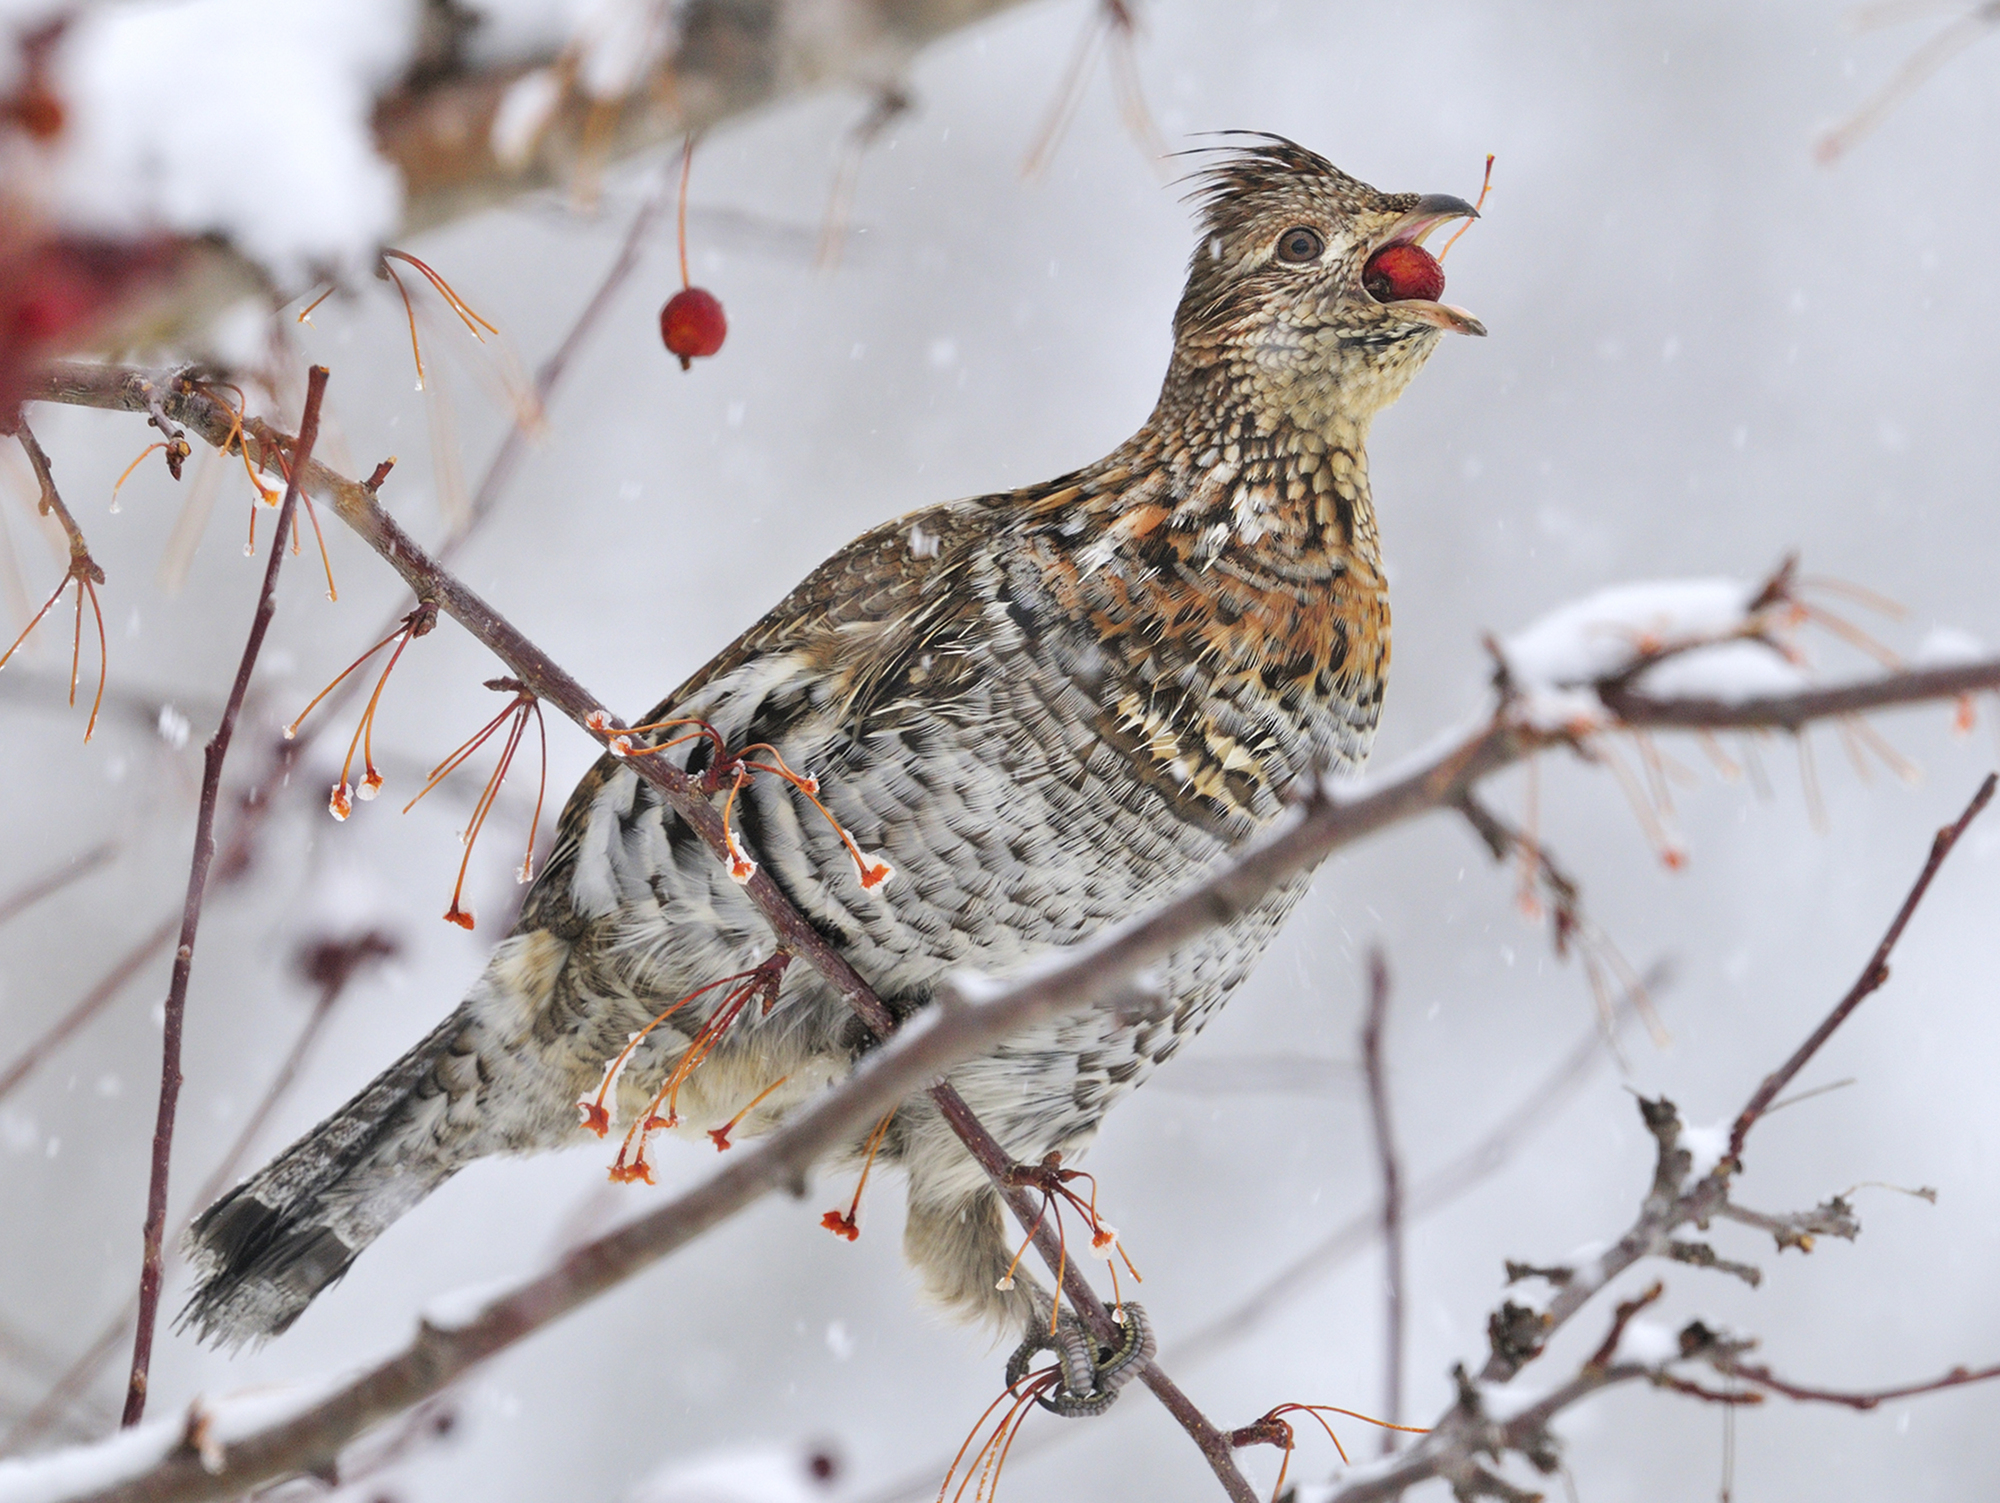 Ruffed grouse need snow for warmth, protection - StarTribune.com